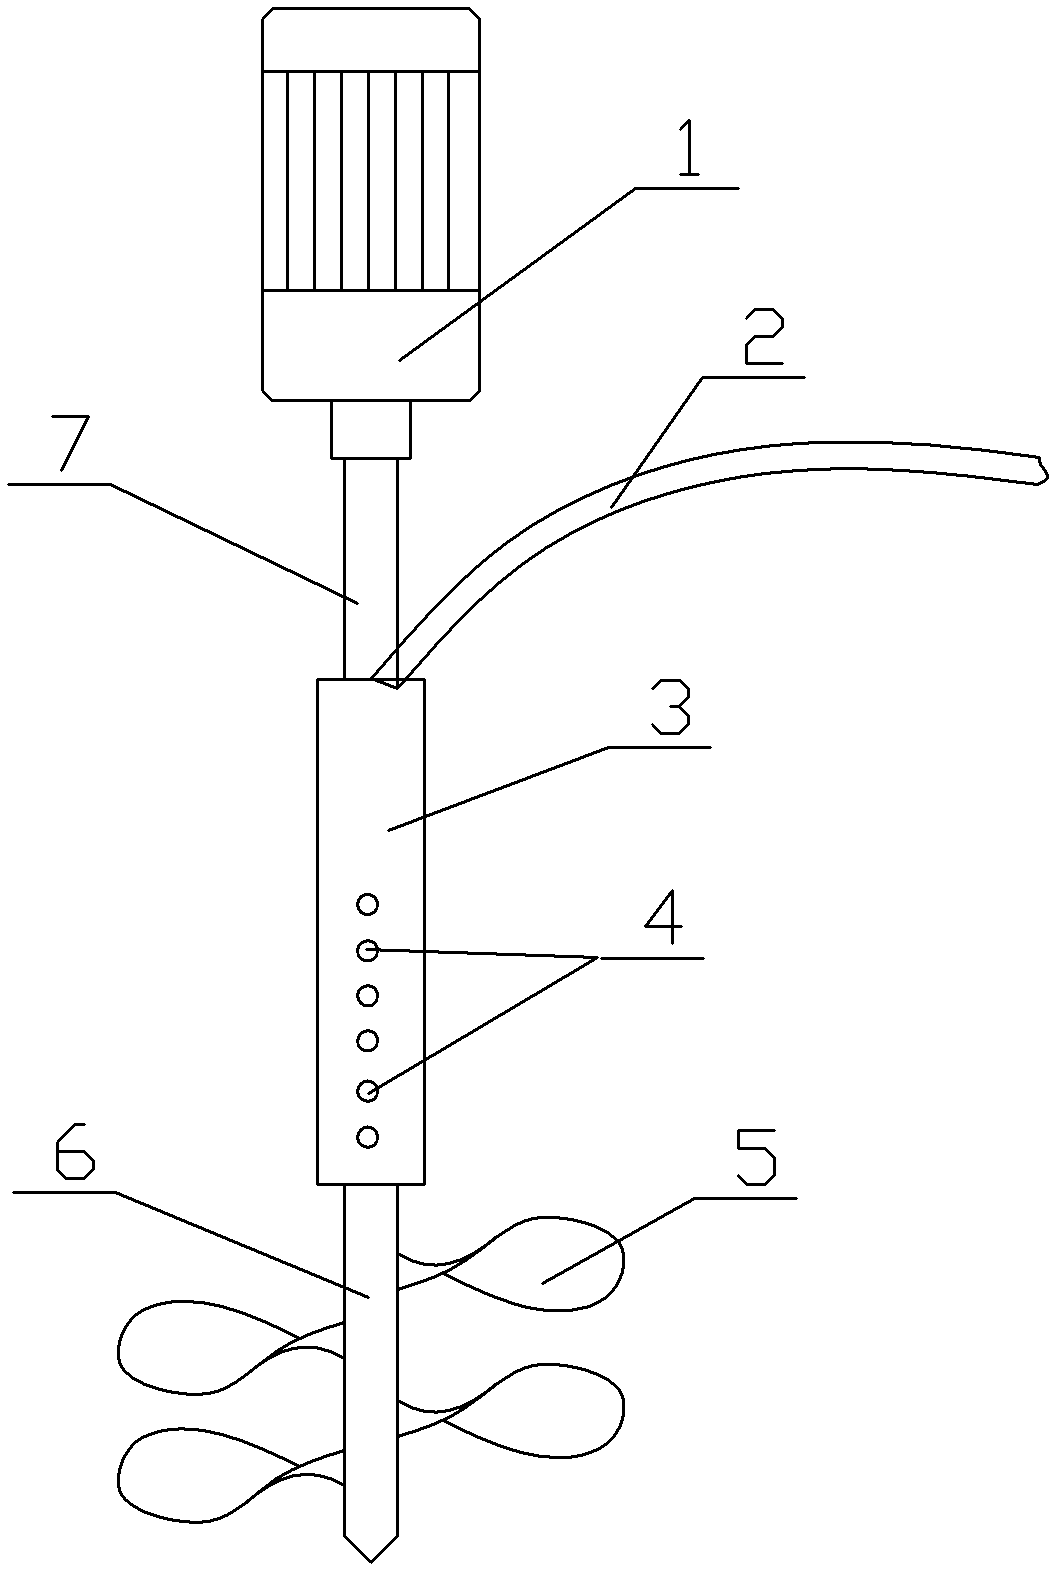 Flocculating agent injecting and adding device for internal soft silt layer of silt storage yard or fill area